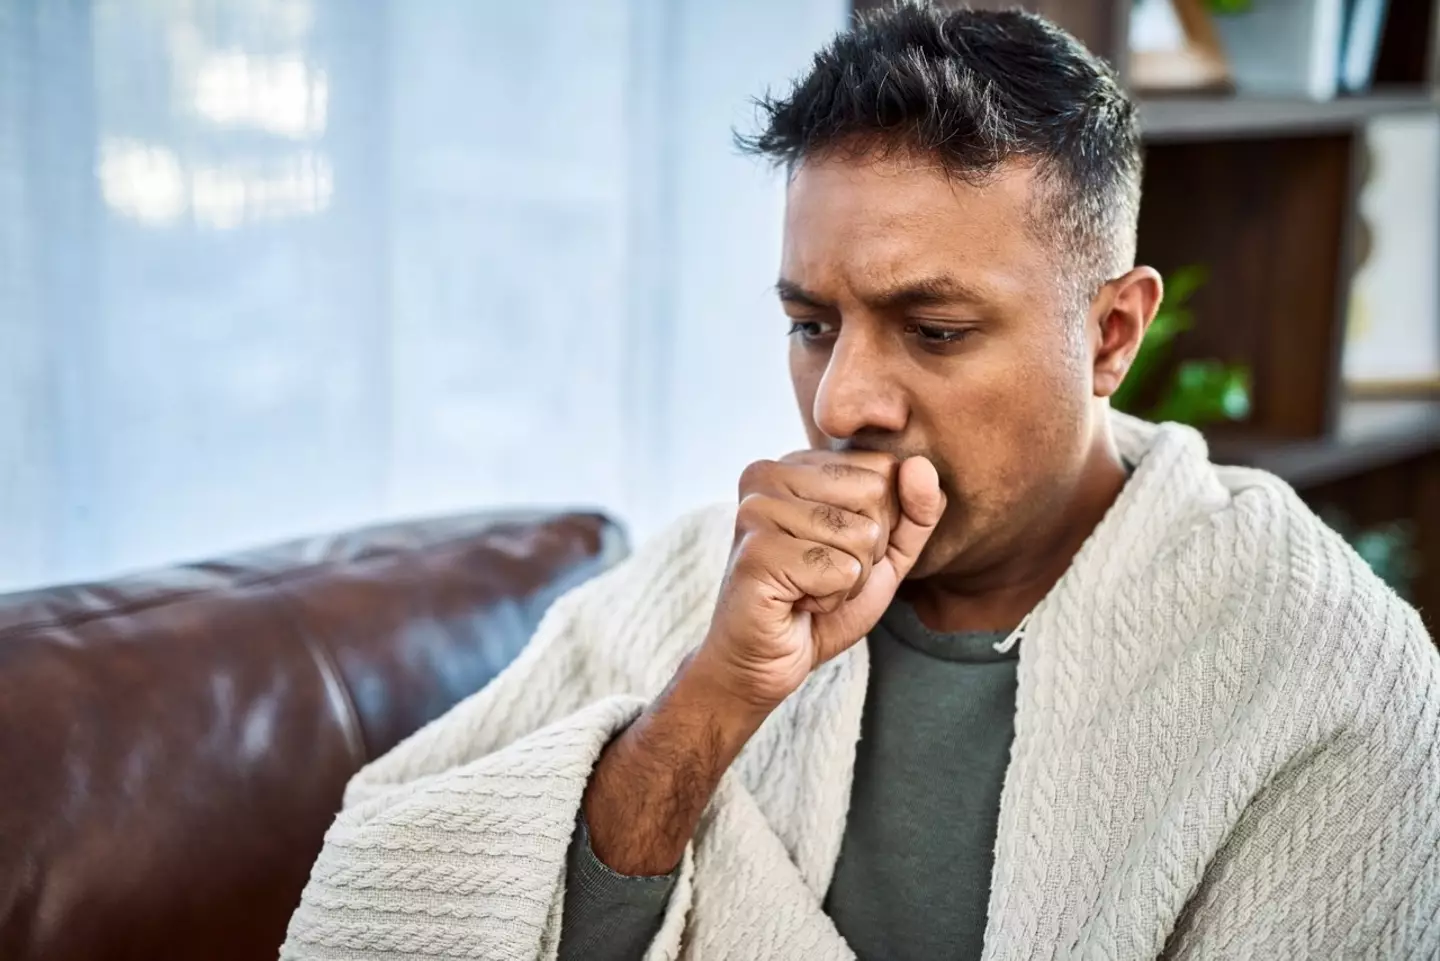 Cases of a highly contagious ‘100 day cough’ are up 250 percent in the UK.